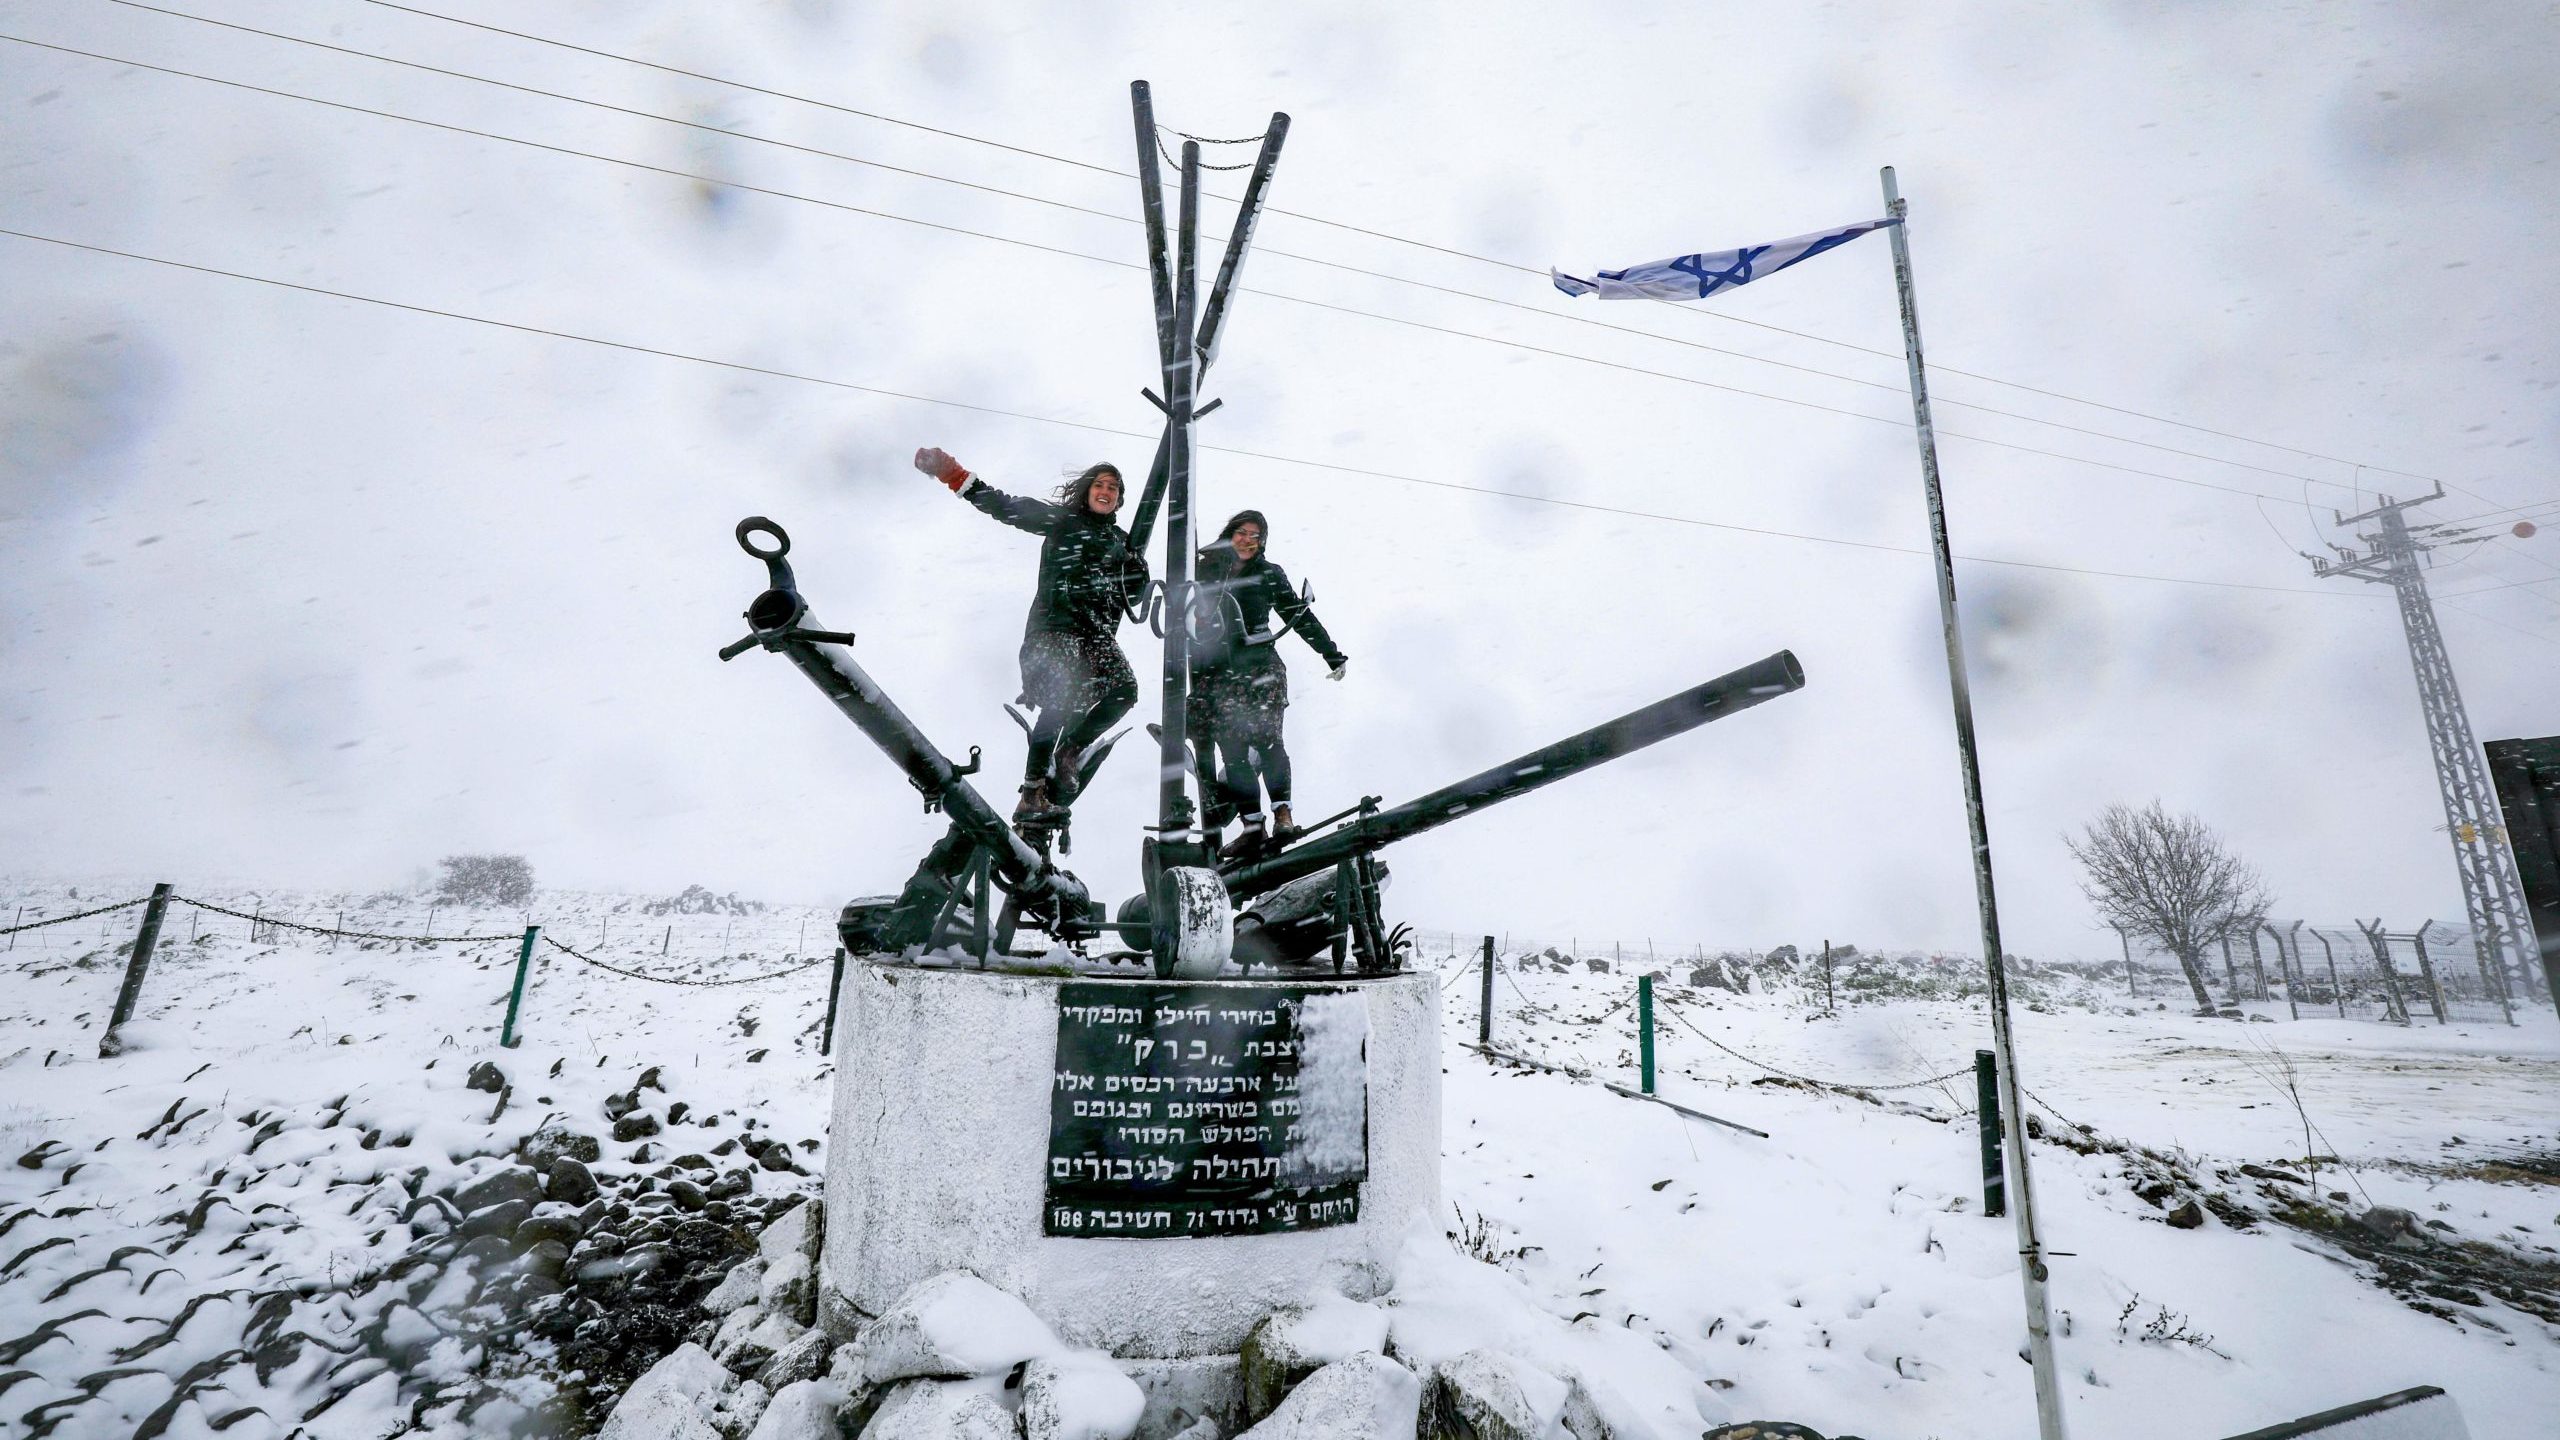 Golan Businesses Welcome Israeli Snow Tourists as Local Gov’ts Learn from Past Storms (with VIDEO)